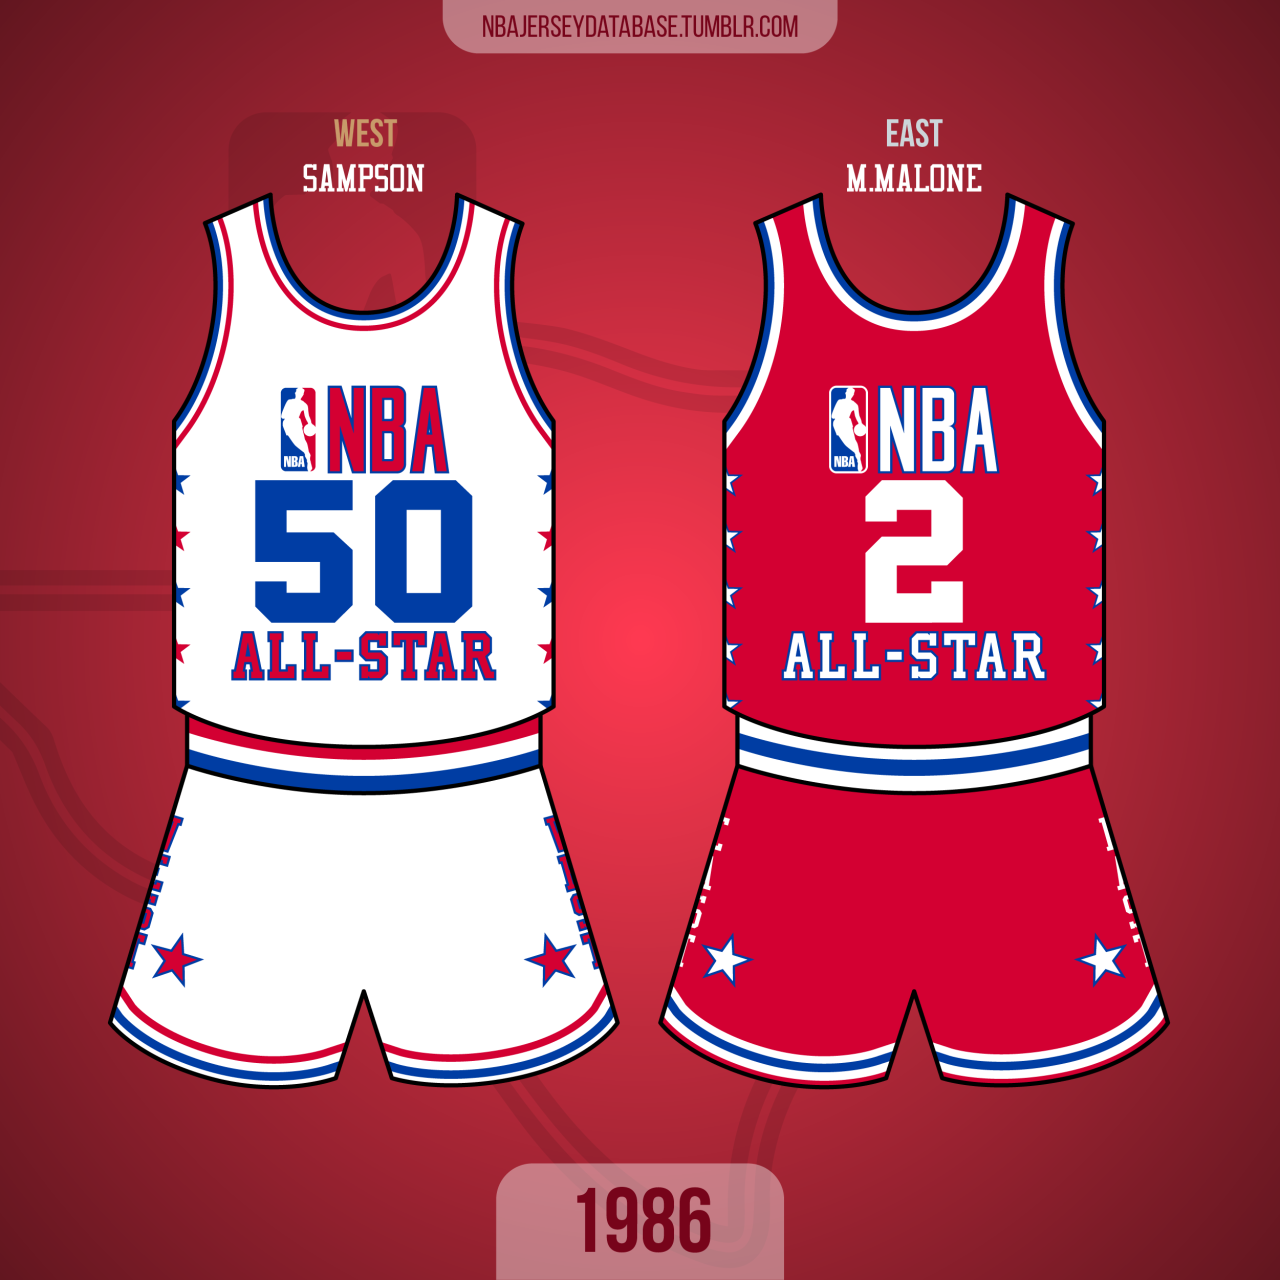 NBA Jersey Database, 1986 NBA All-Star Game Reunion Arena East 139 